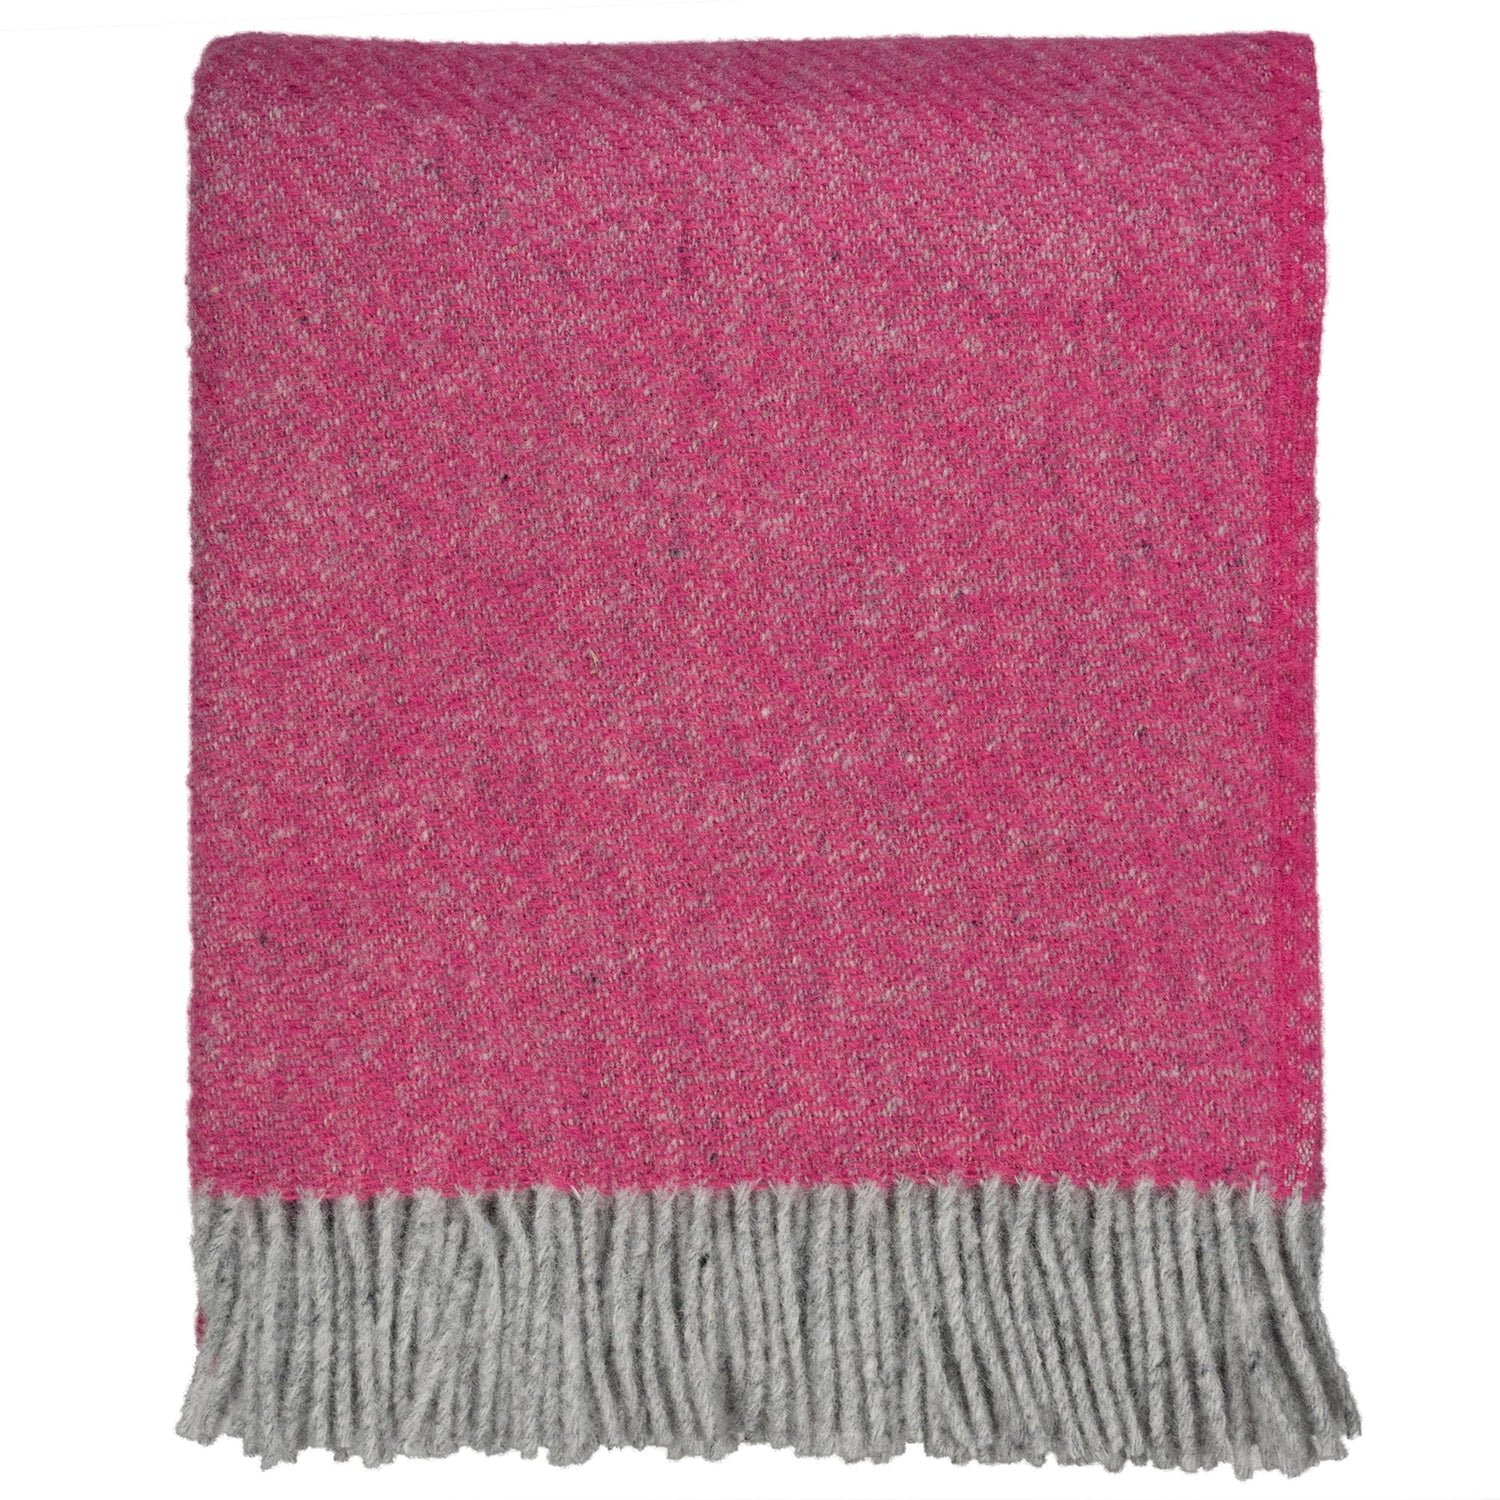 Southampton Home Wool Twill Throw Blanket (Hydrangea Pink)-Throws and Blankets-810032752446-SHWoolTwillPink-Prince of Scots